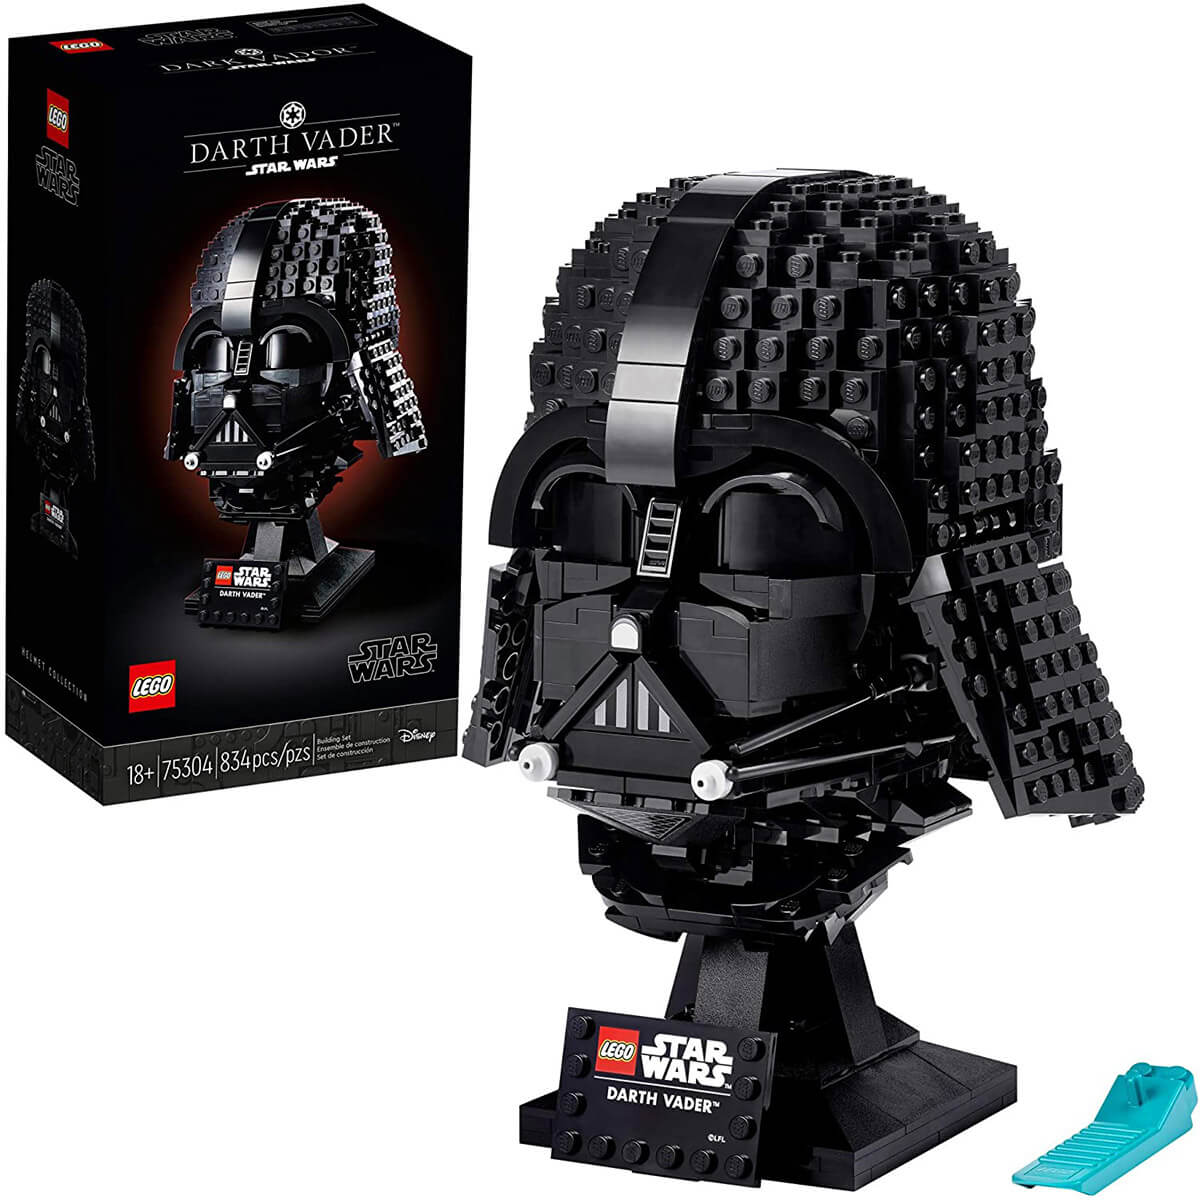 LEGO Darth Vader Helmet completed and displayed on a stand with package in the background.